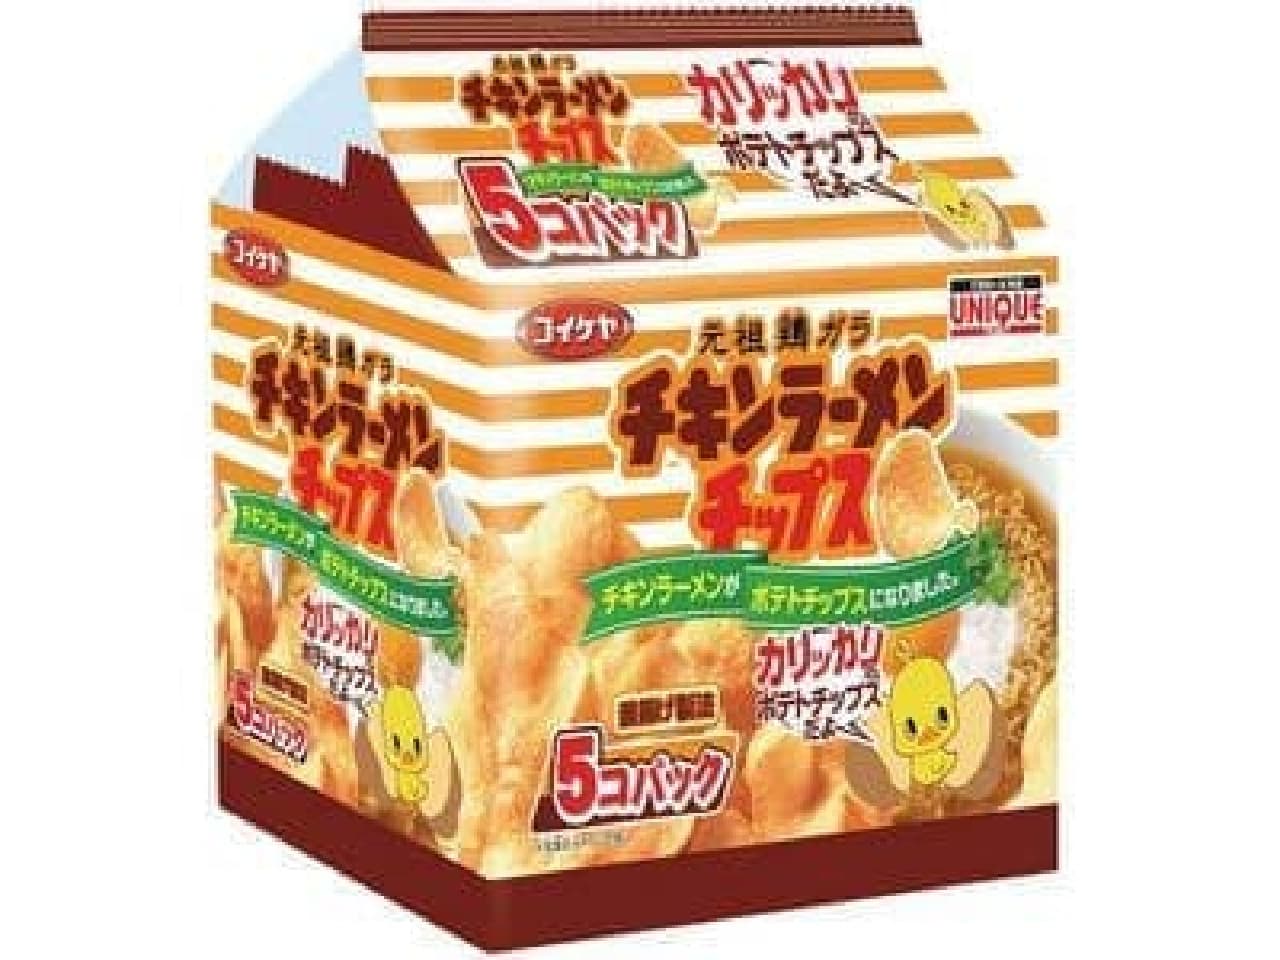 They are sold at supermarkets for 398 yen (my image).